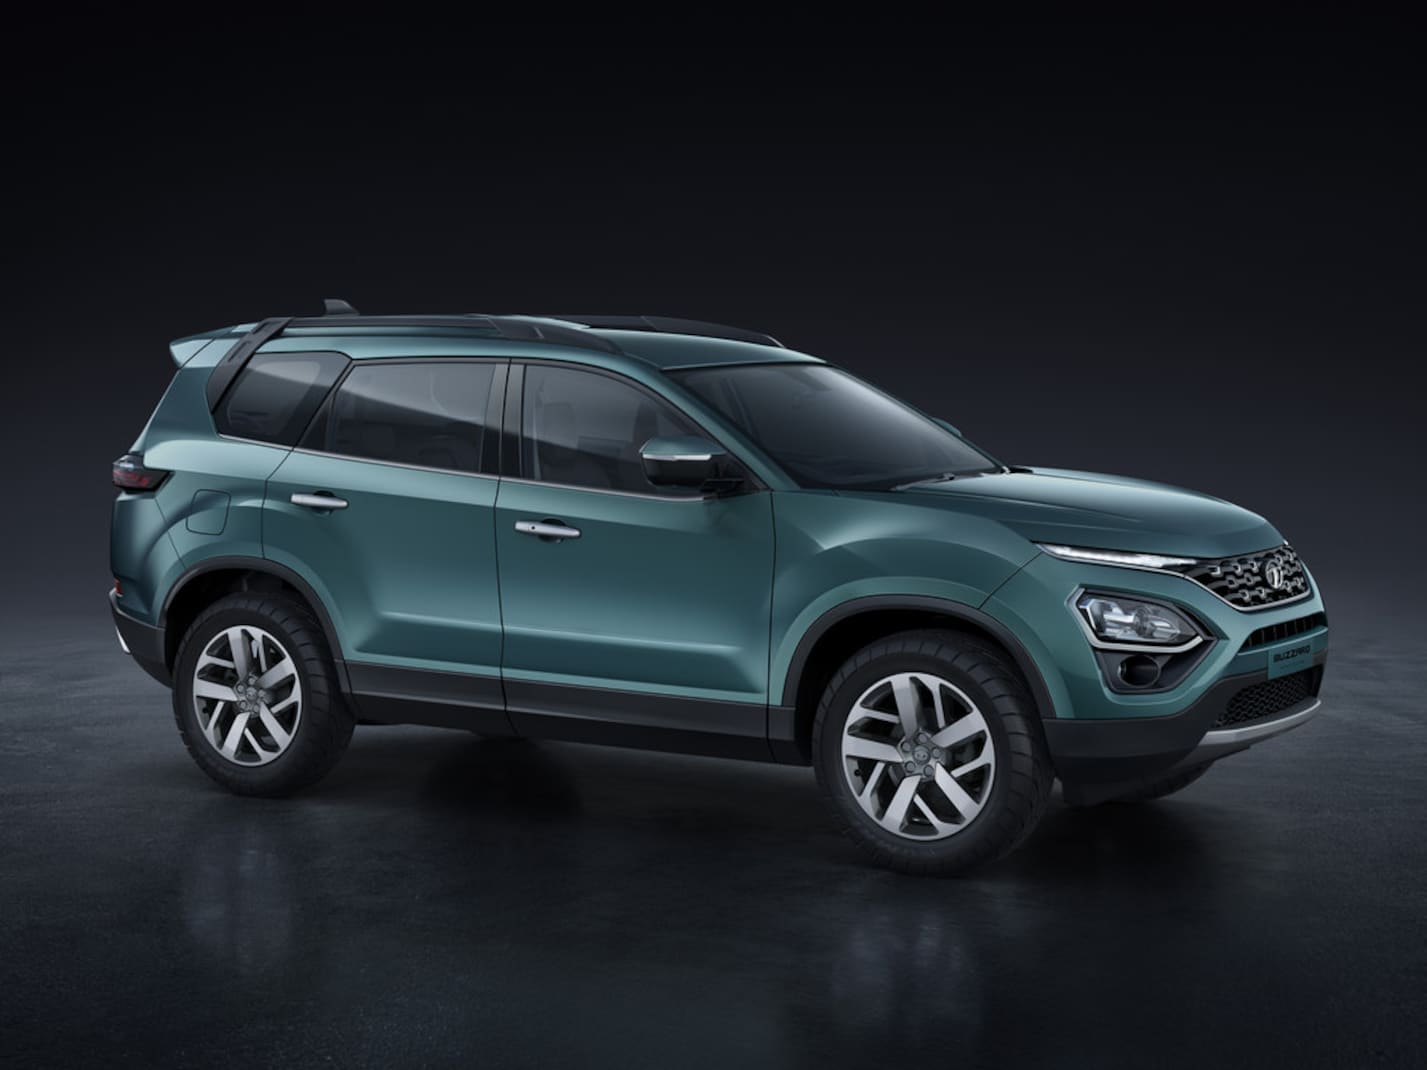 Tata Tata Buzzard SUV is a seven-seater variant of the Tata Harrier.  The Buzzard is codenamed H7X